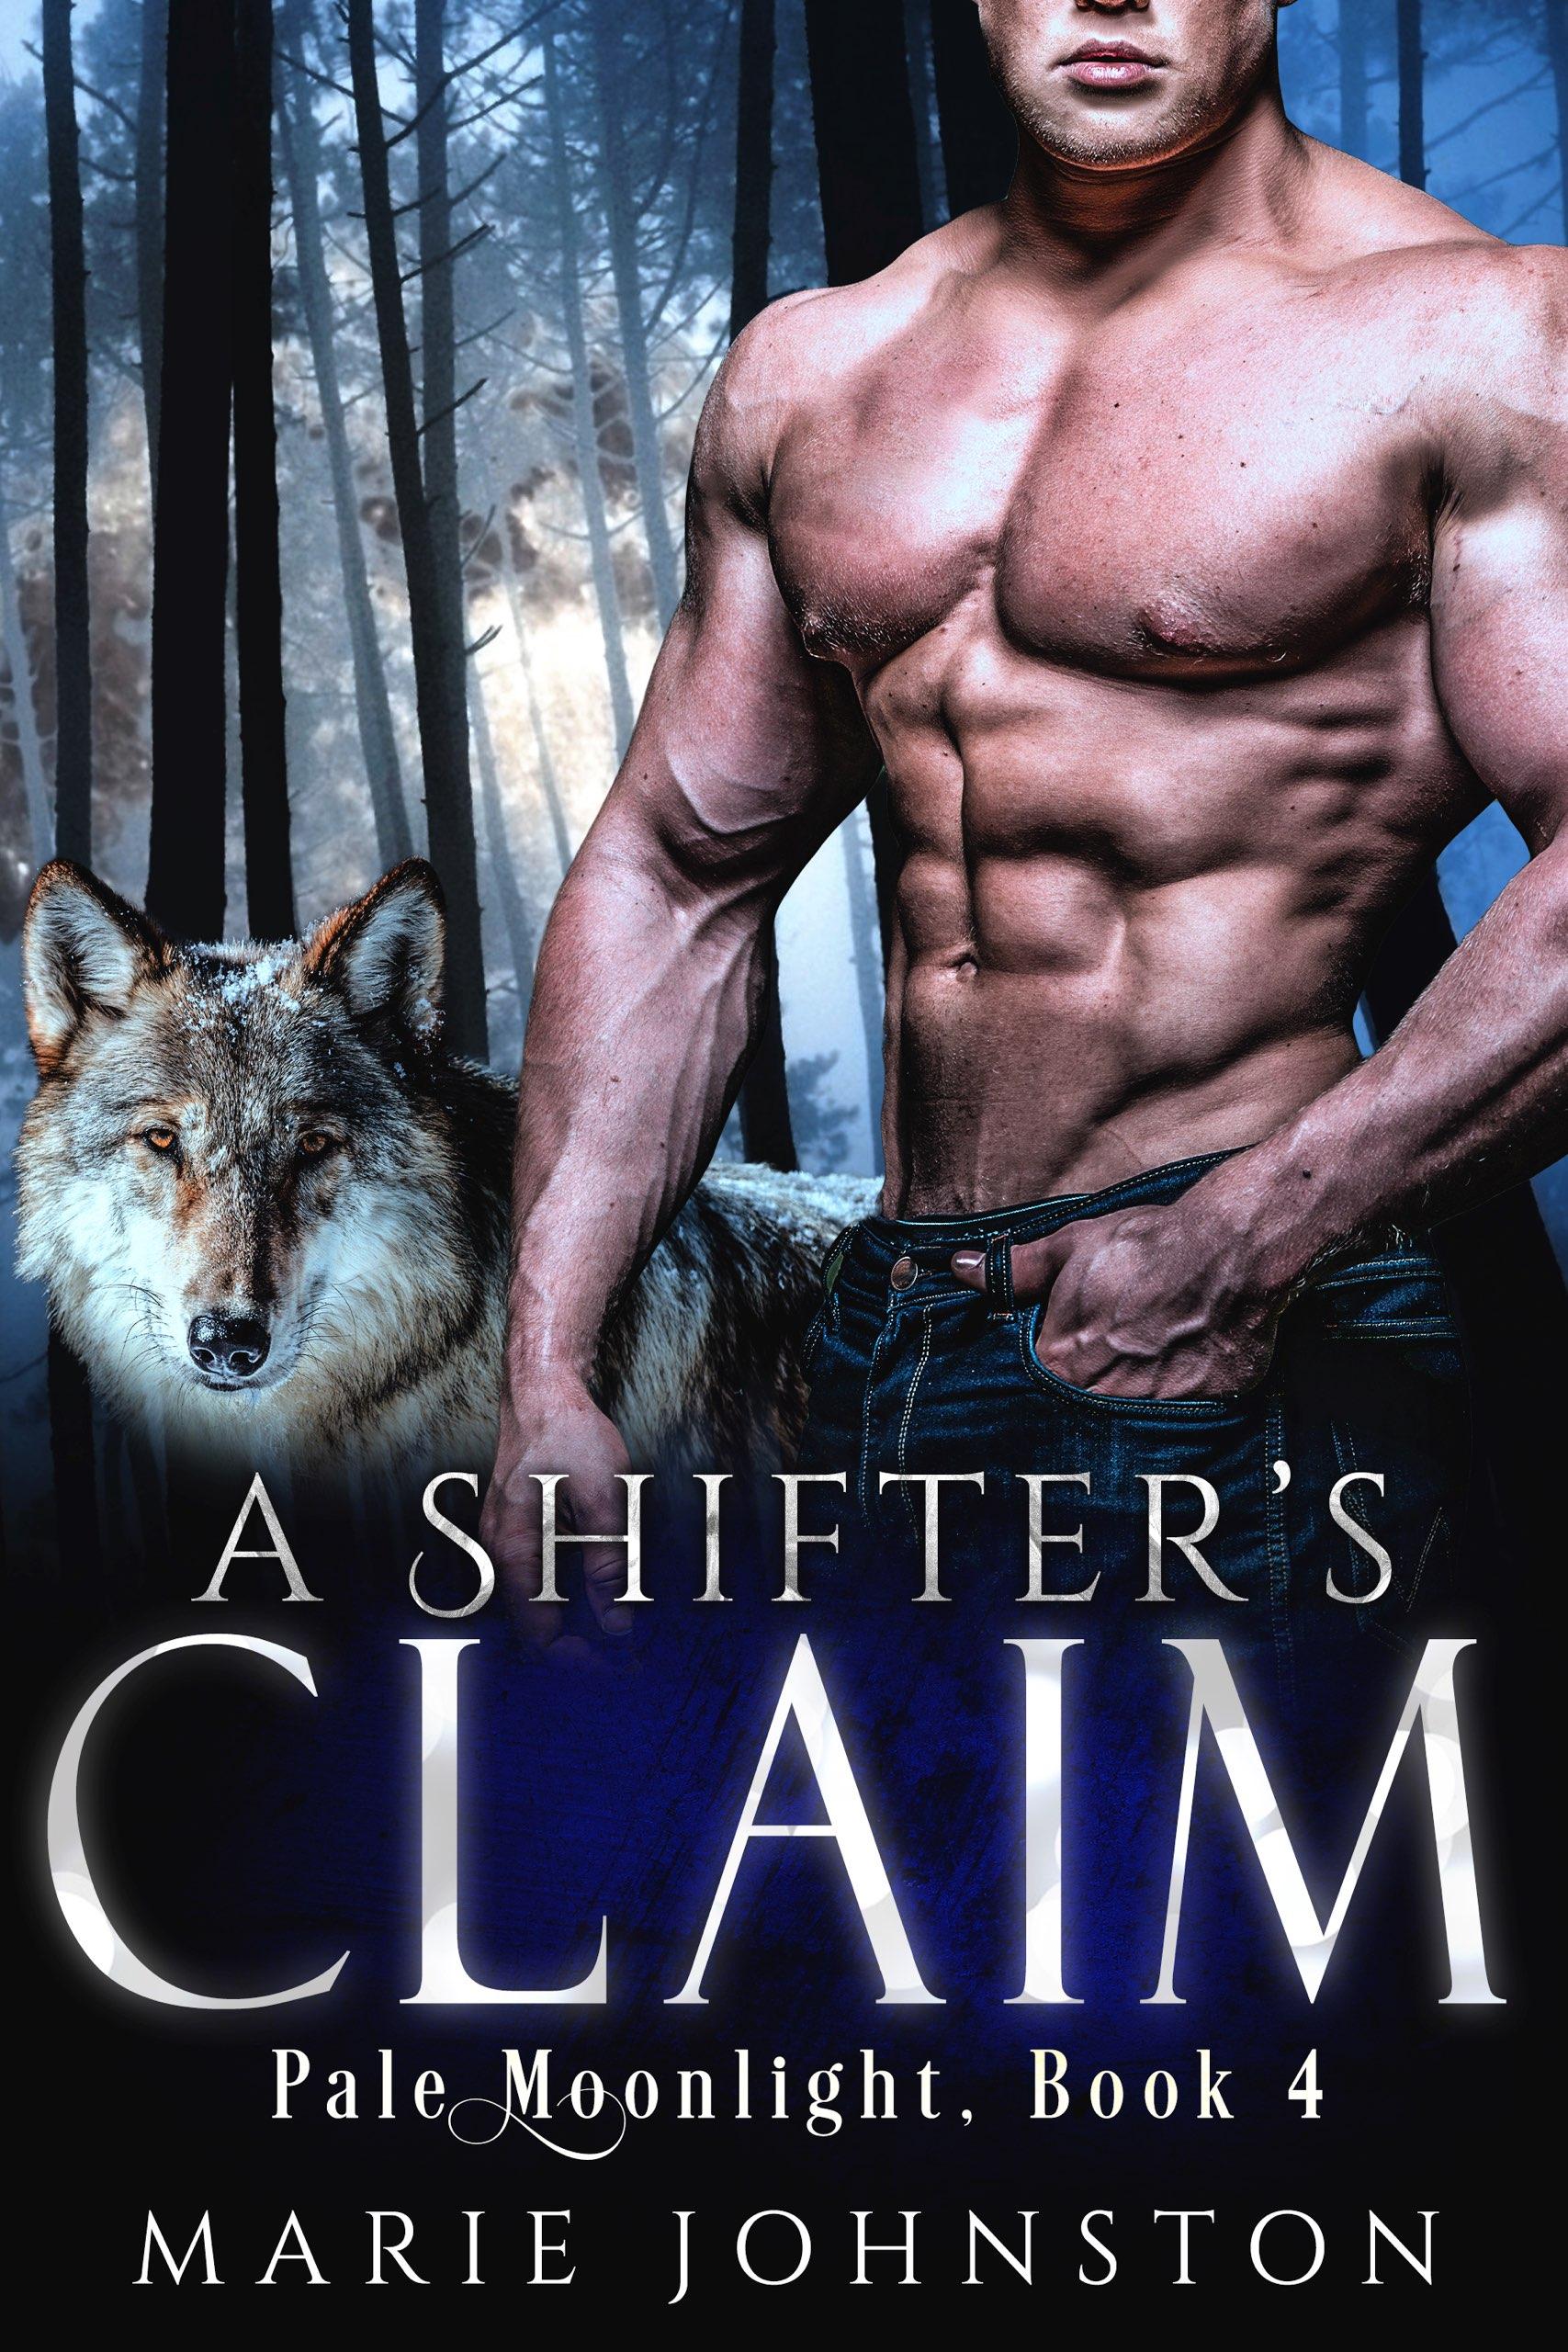 A Shifter"s Claim